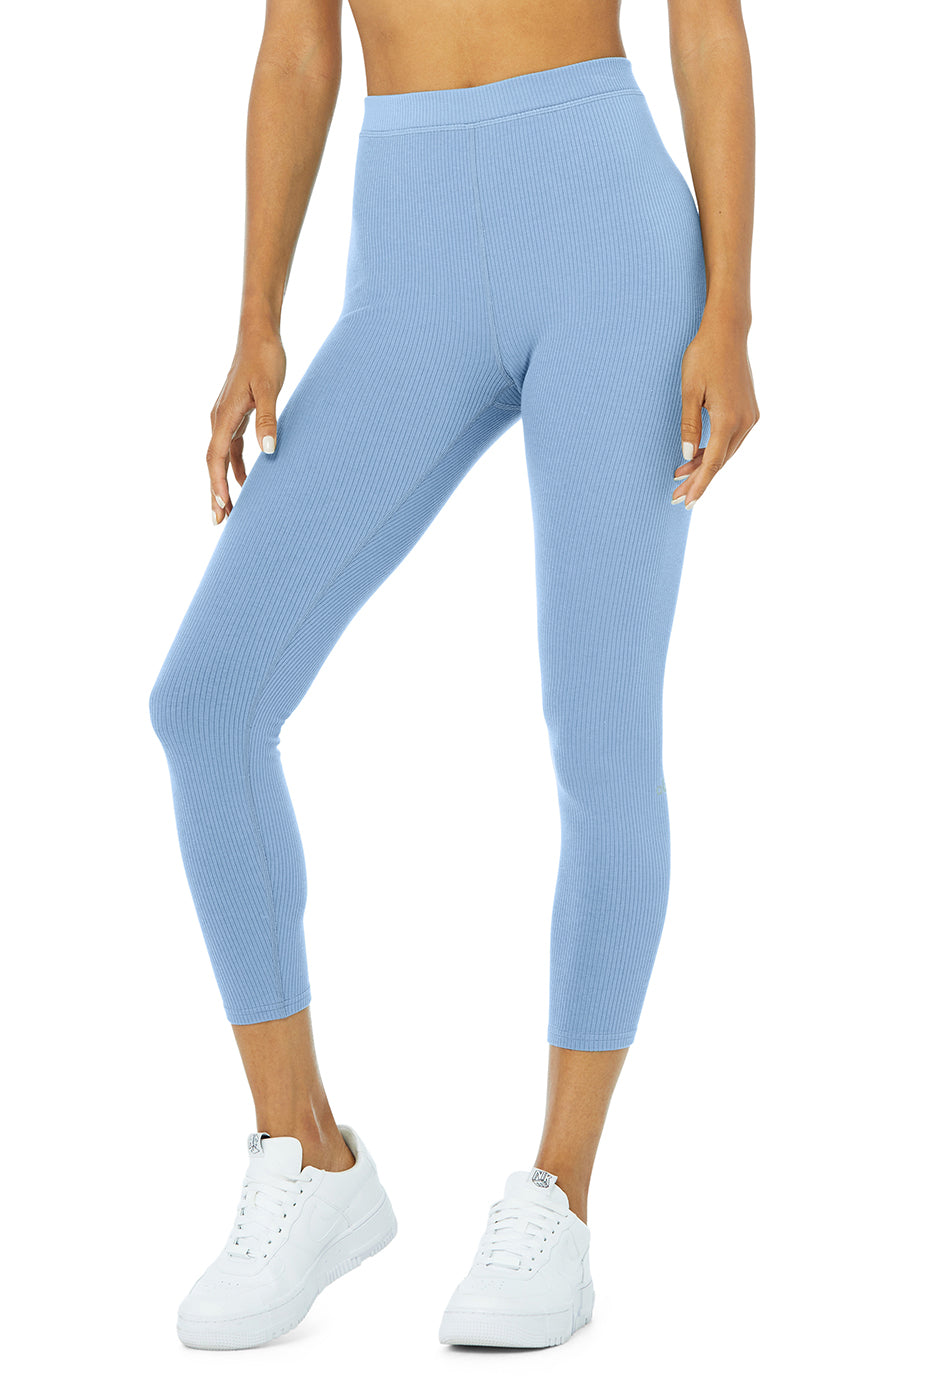 Ribbed High-Waist 7/8 Blissful Legging in Blue Skies by Alo Yoga